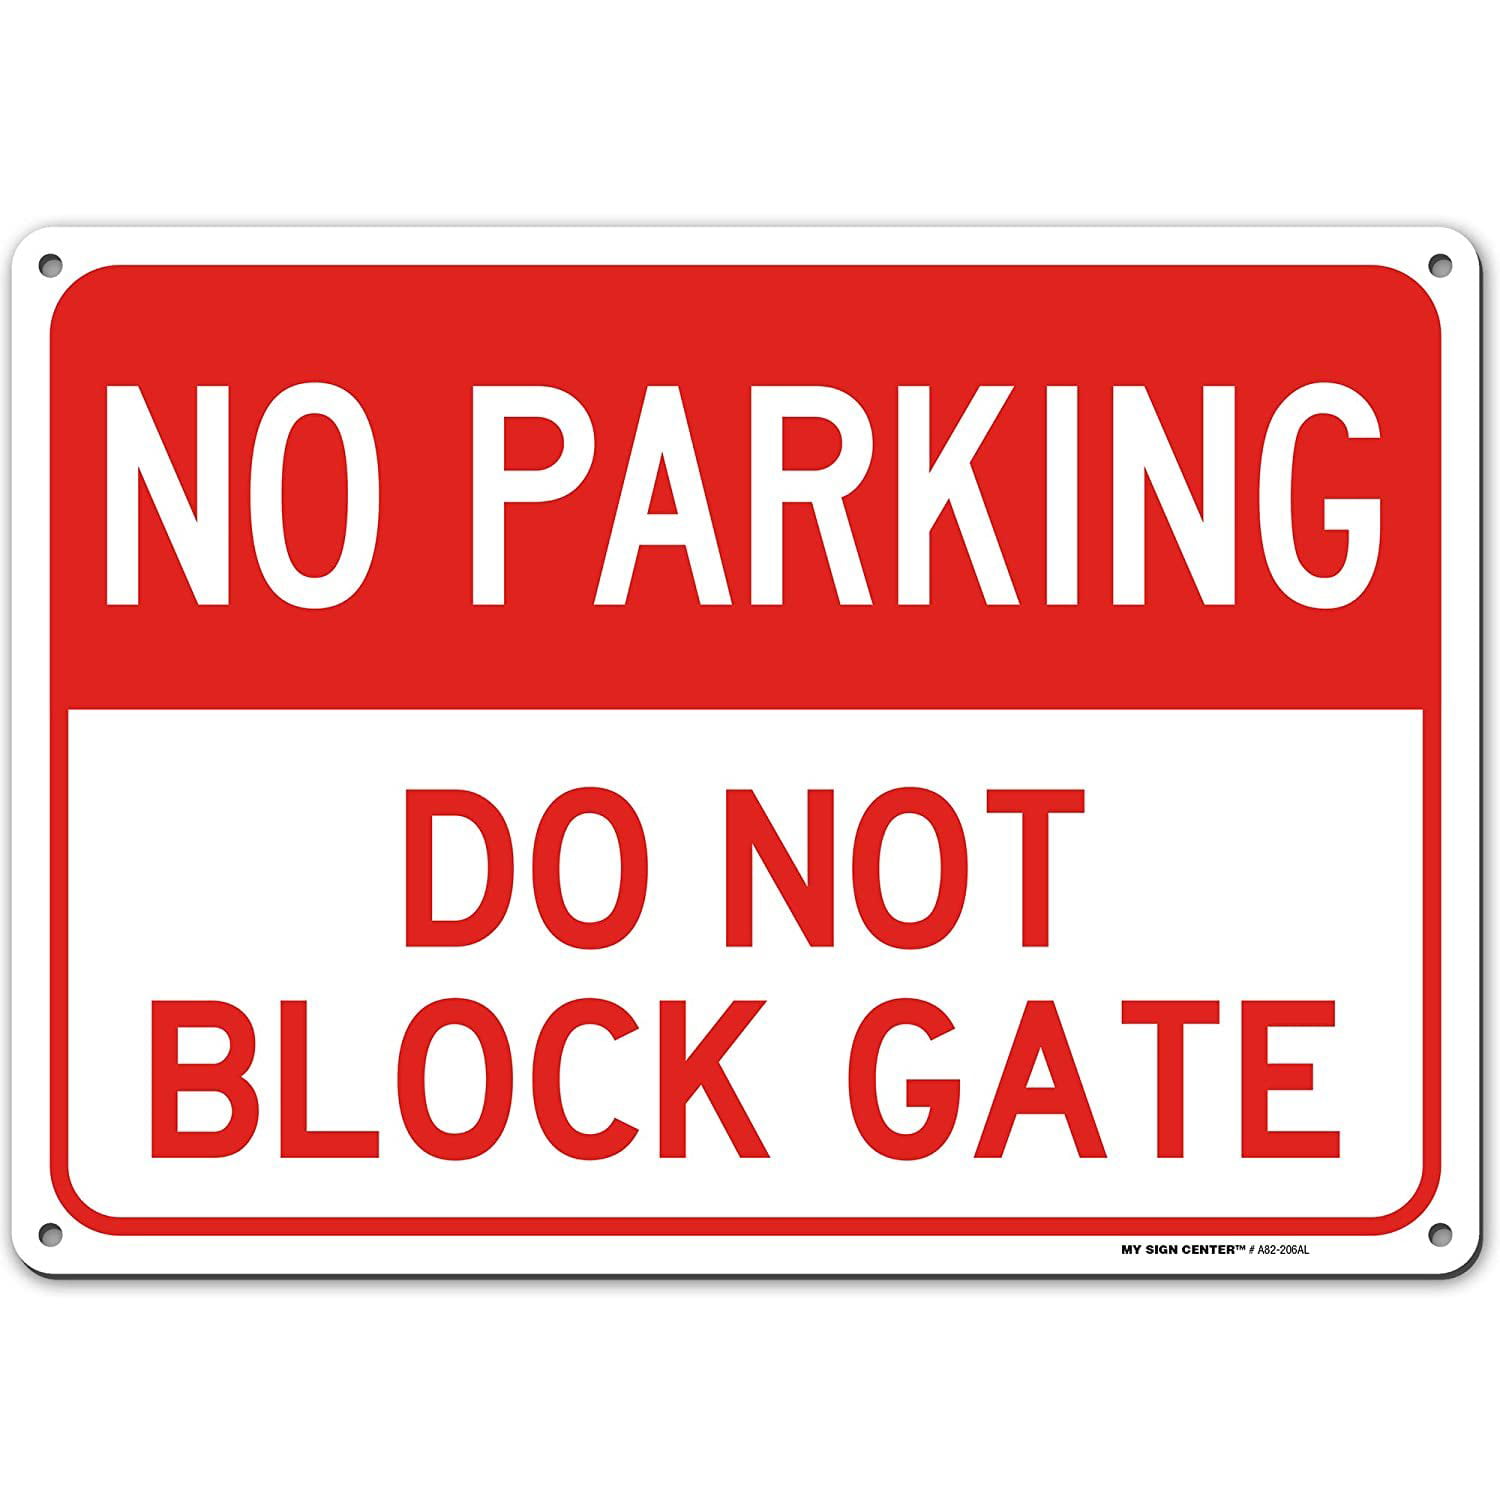 IDEAL GIFT WALL PLAQUES DRIVEWAY 10" x 8" GATE NO PARKING METAL SIGN